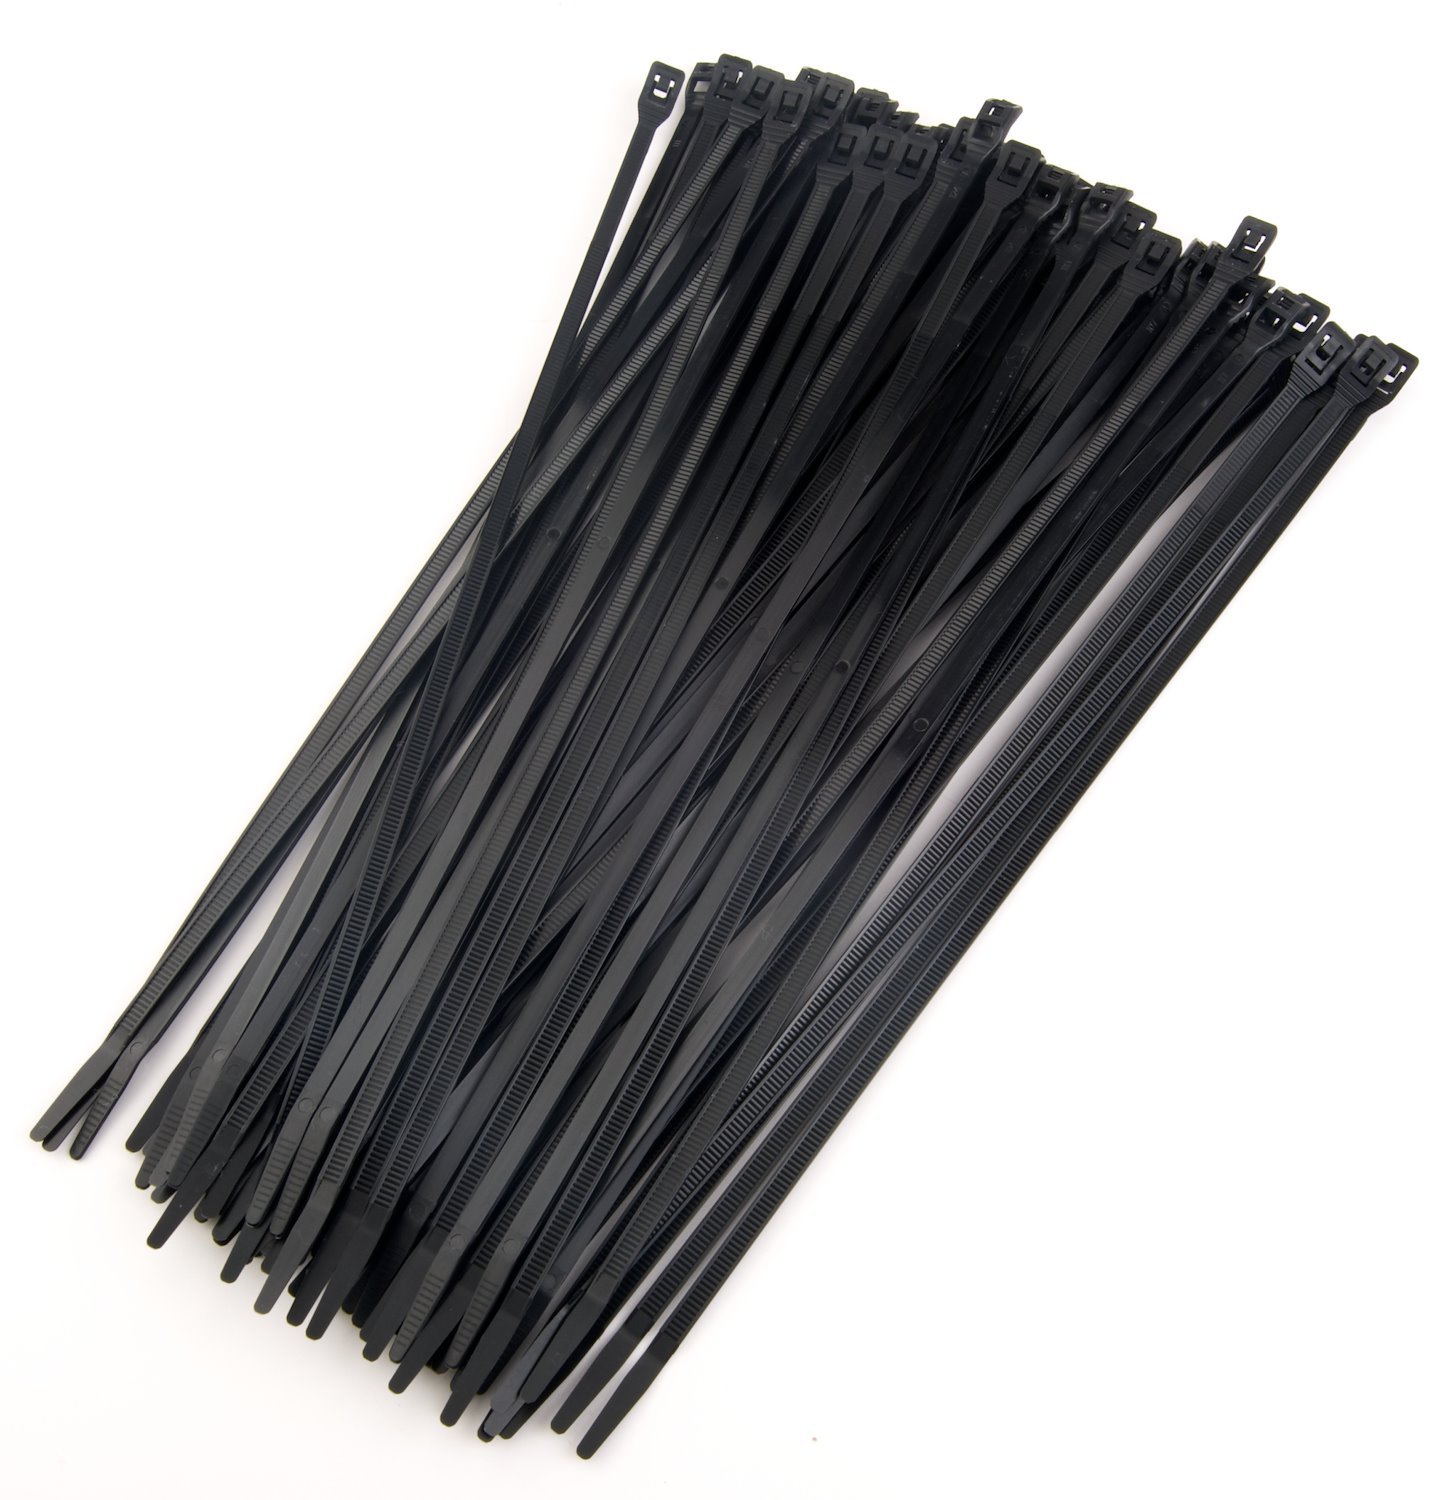 Cobra Low-Profile Wire/Cable Ties [11 in. Black]